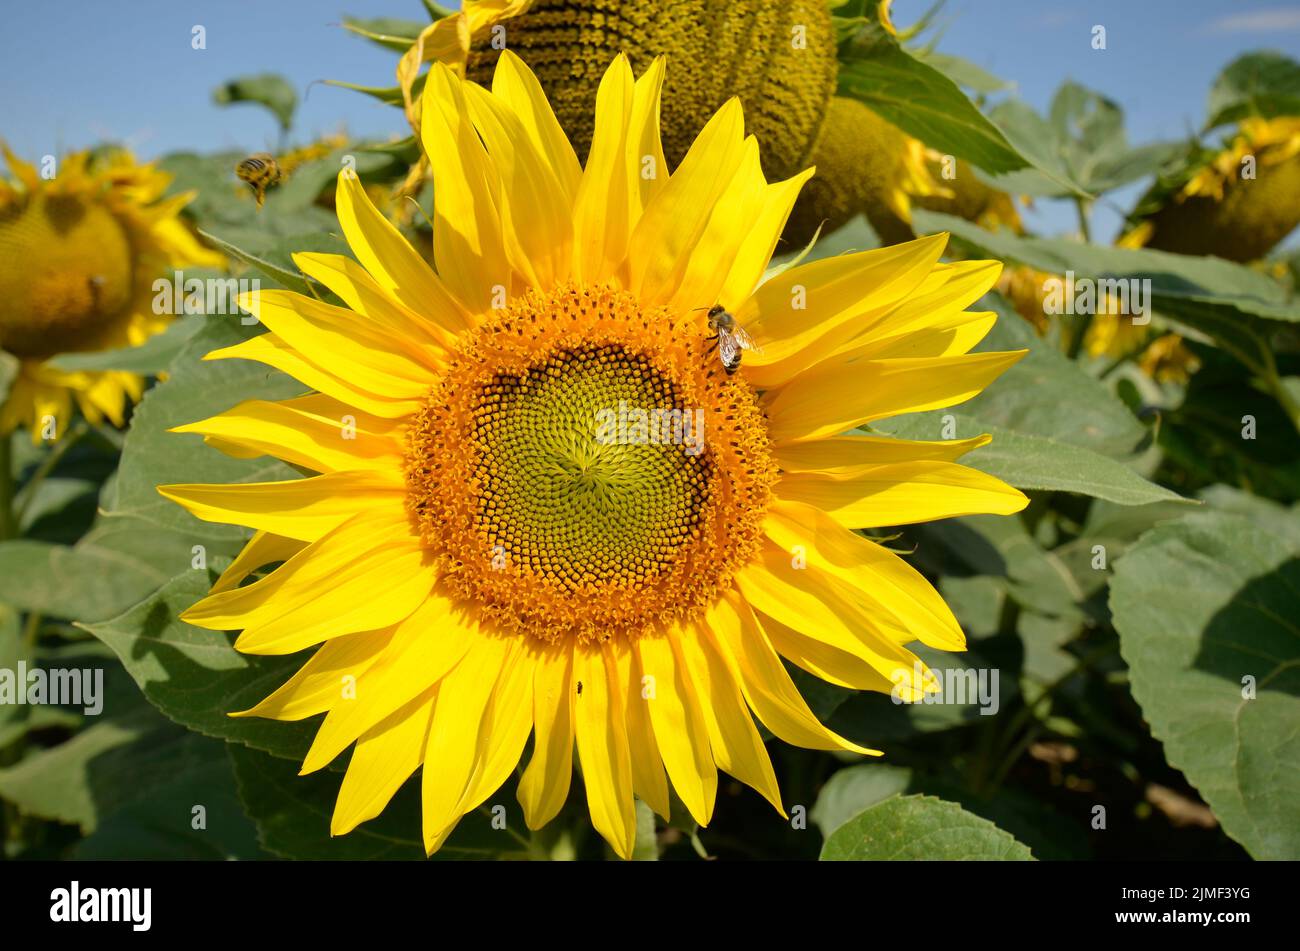 Austria, sunflower blossom- the seeds are used in industry to produce various products such as edible oil, snack seeds, bird feed and others and they Stock Photo